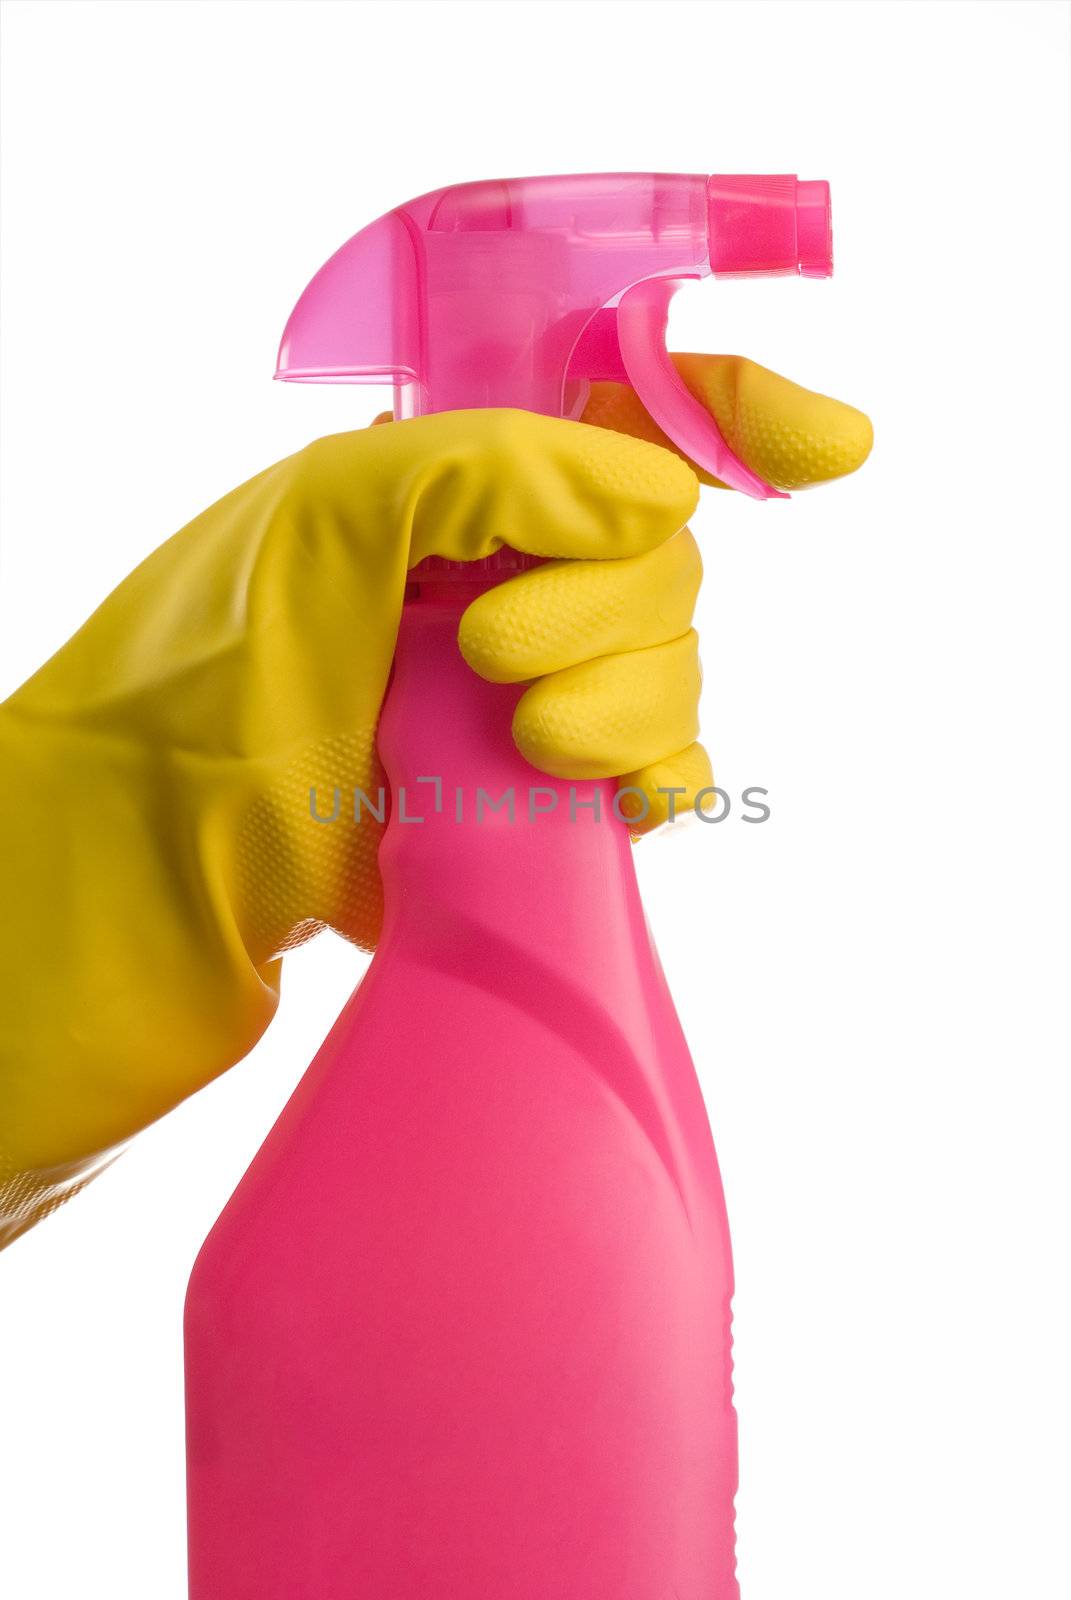 Pink cleaning bottle with janintor or housewife hand in yellow glove